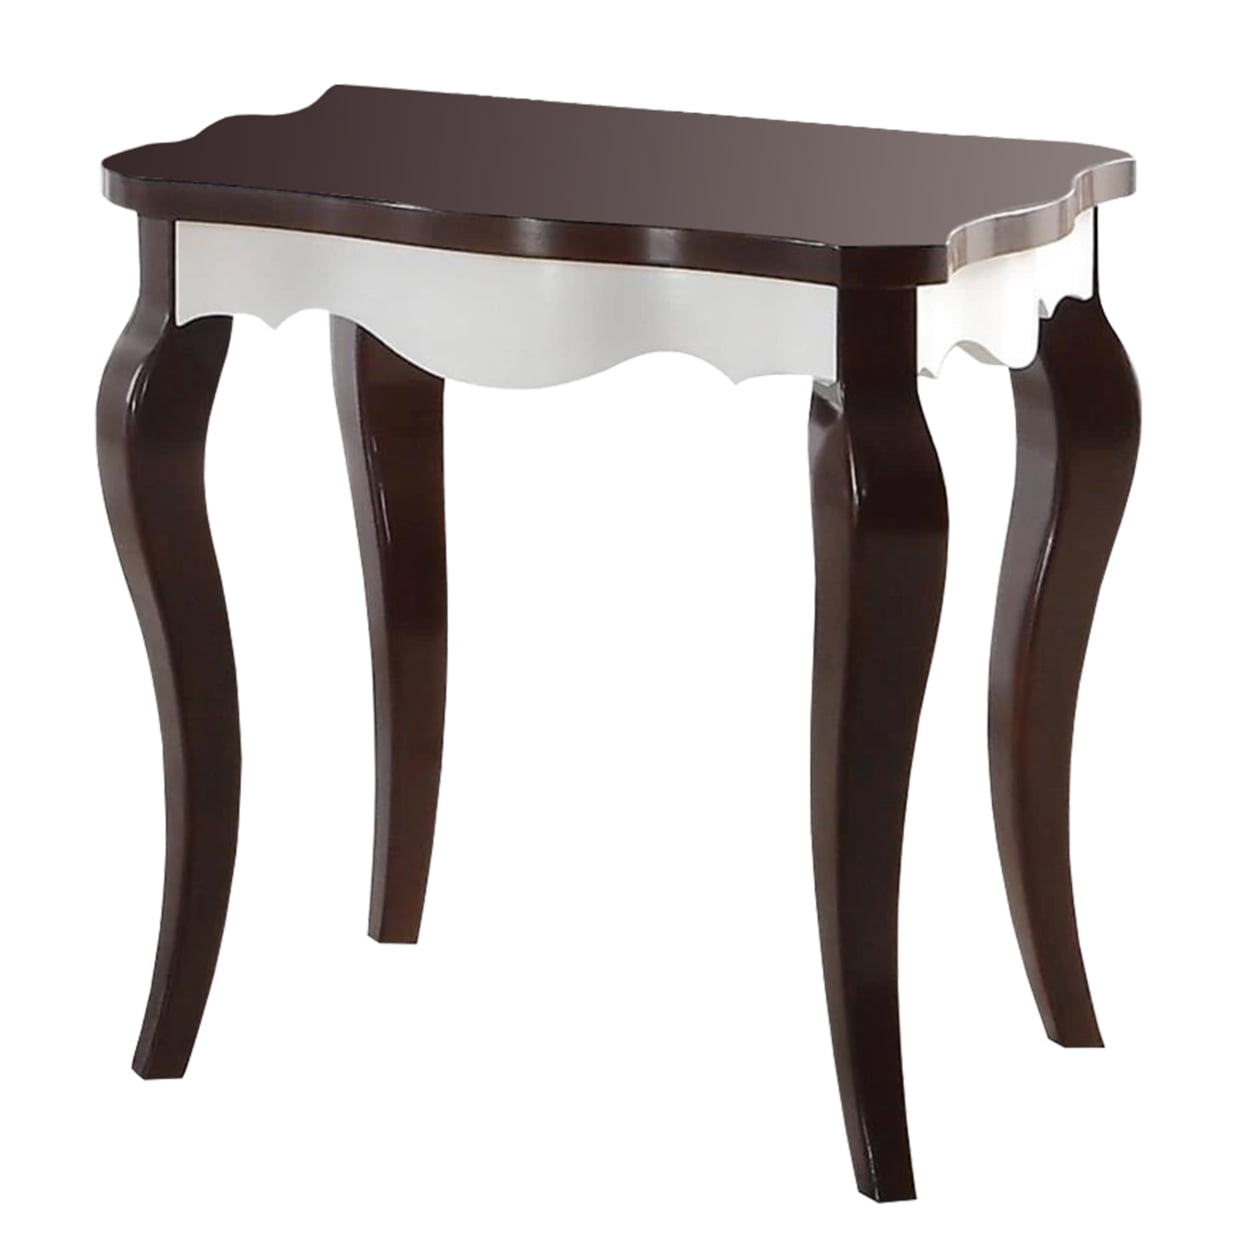 Picture of ACME 80682 Mathias End Table - Walnut & White - 24 x 22 x 24 in.